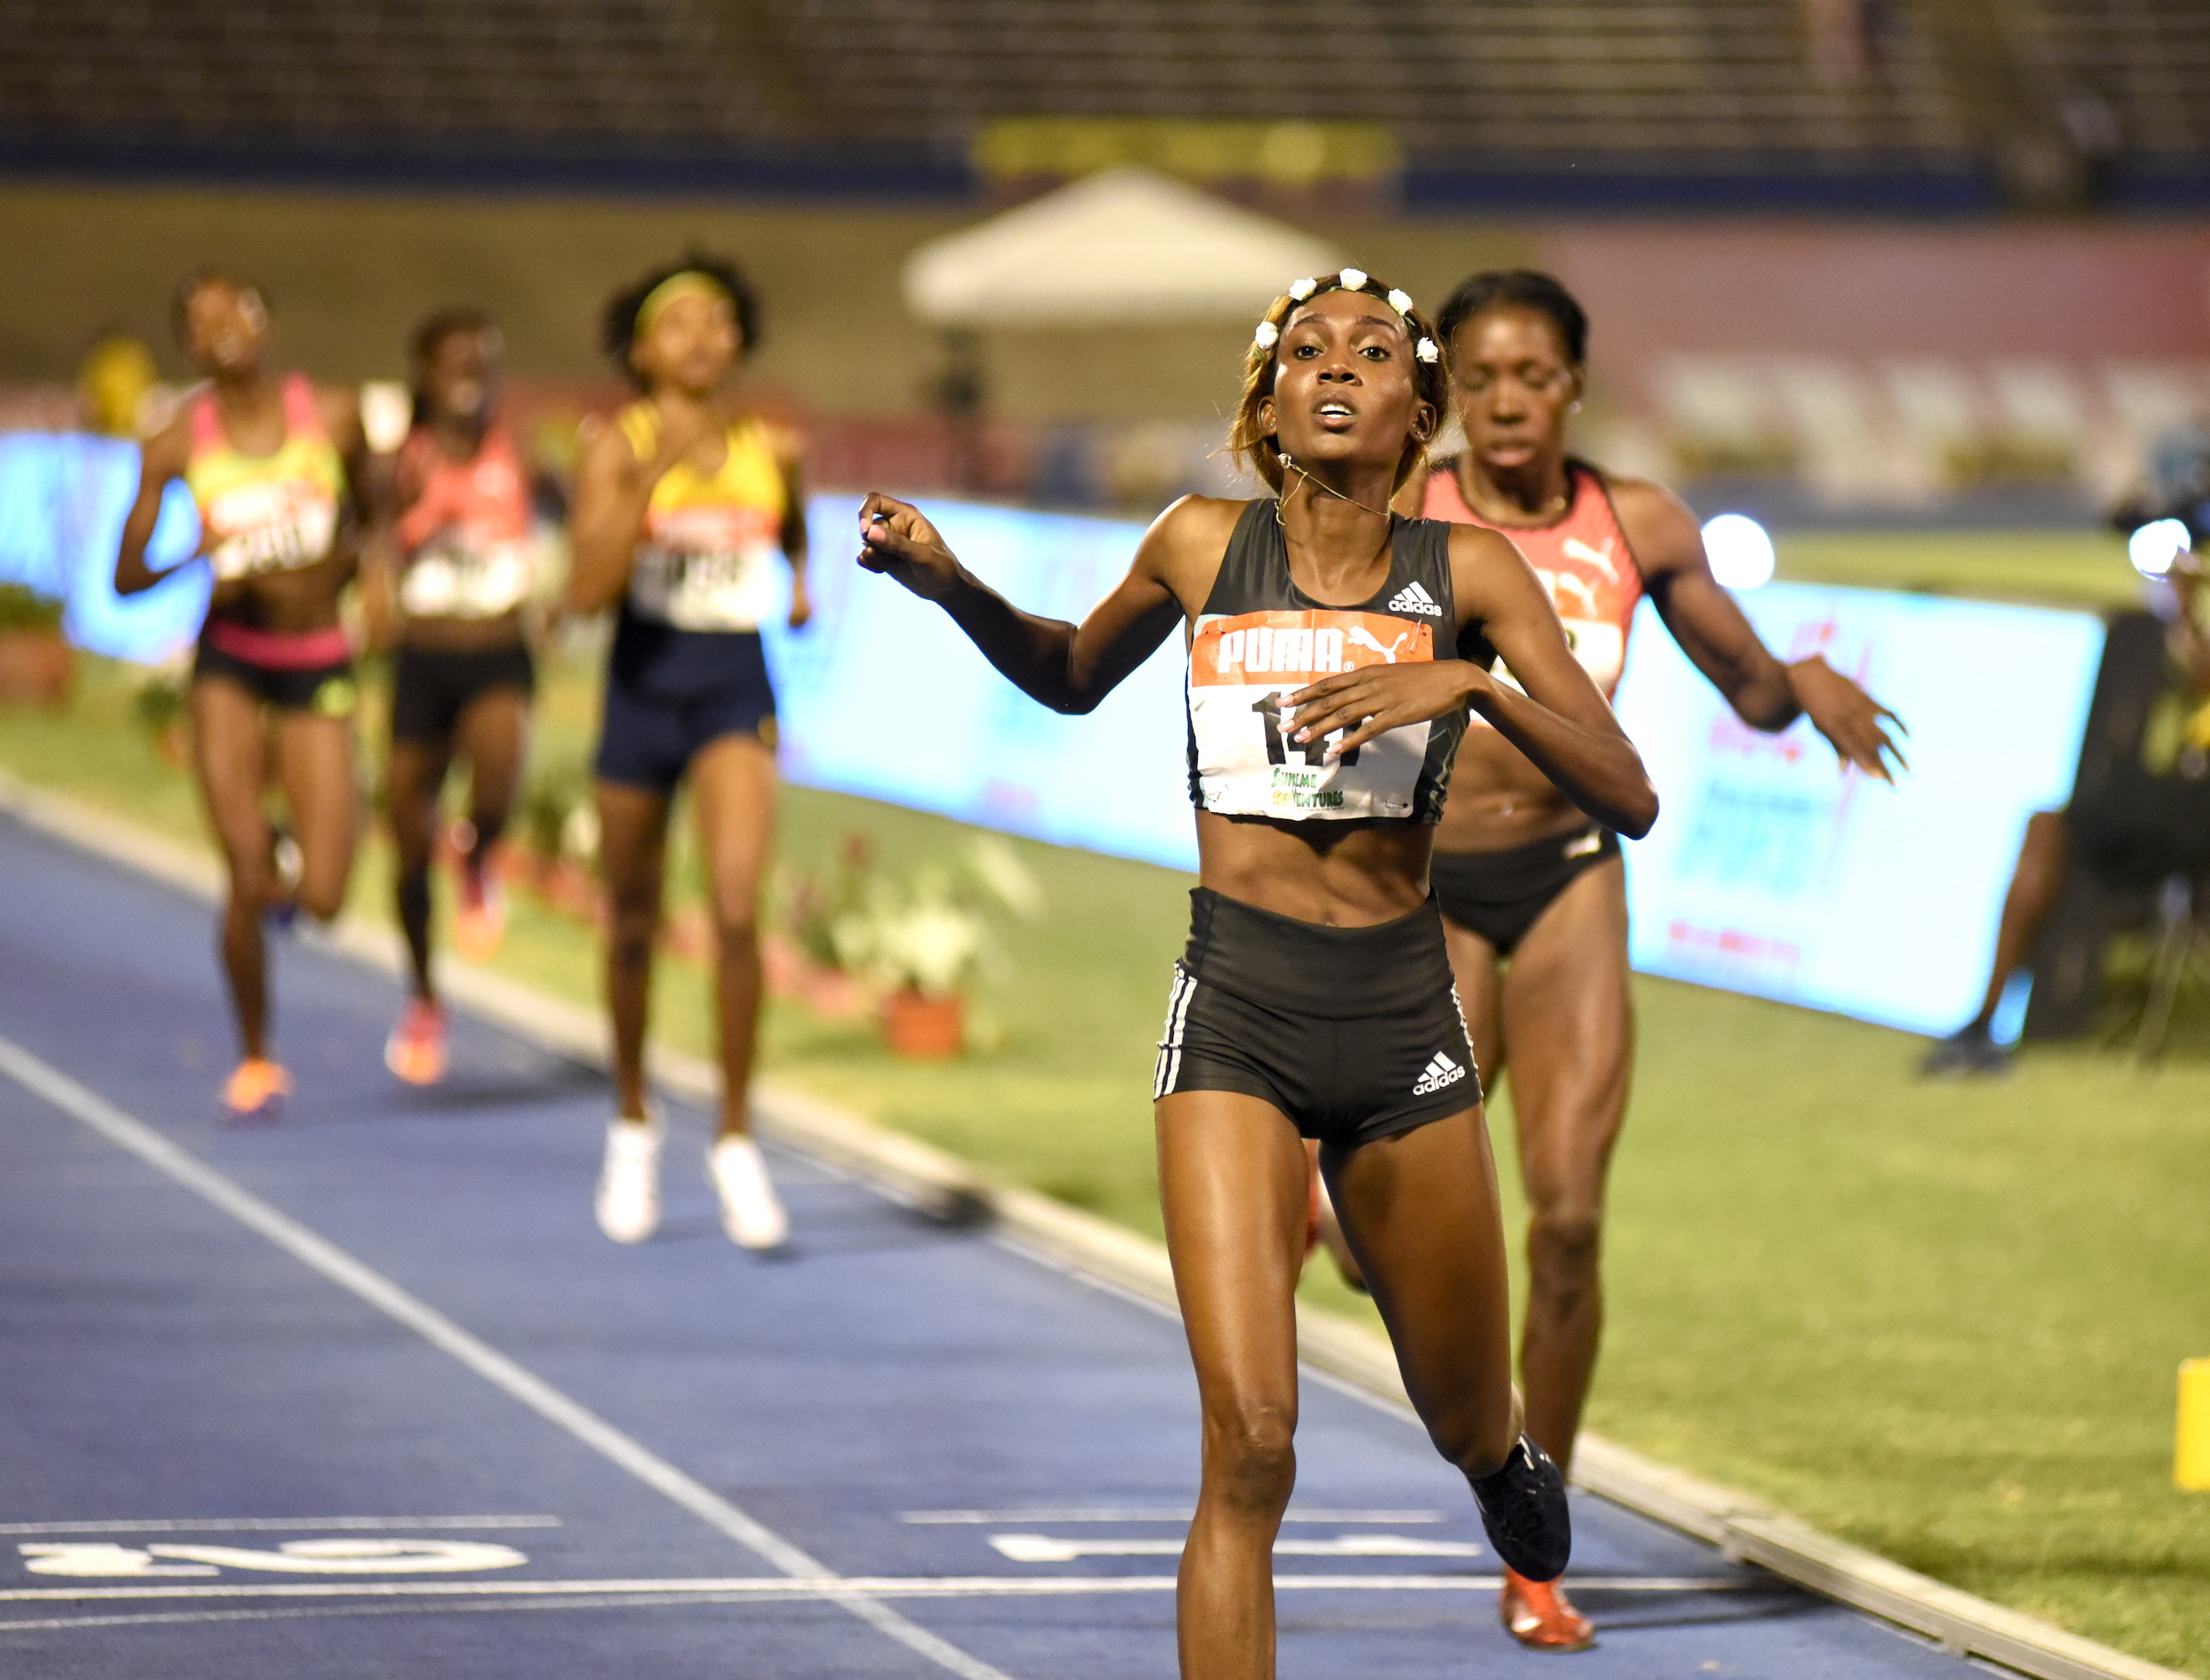 Goule sets new Jamaican 1,000m record